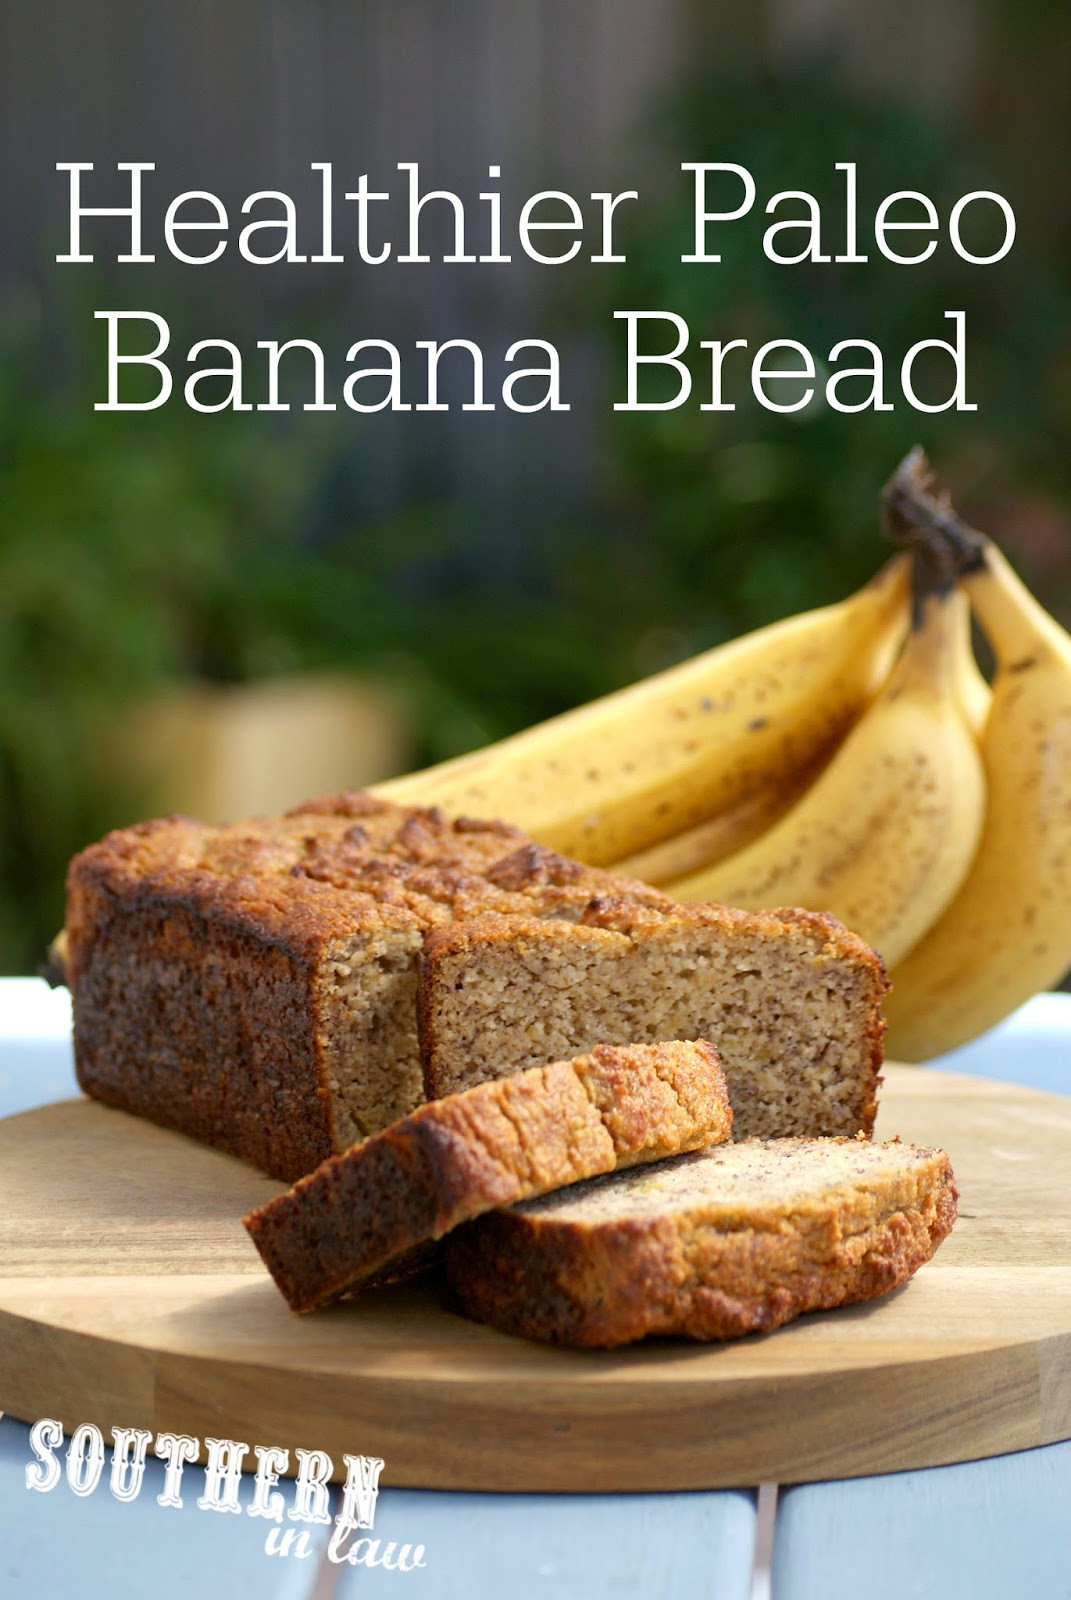 Healthy Low Carb Bread Recipes
 Southern In Law Recipe The Best Healthy Paleo Banana Bread